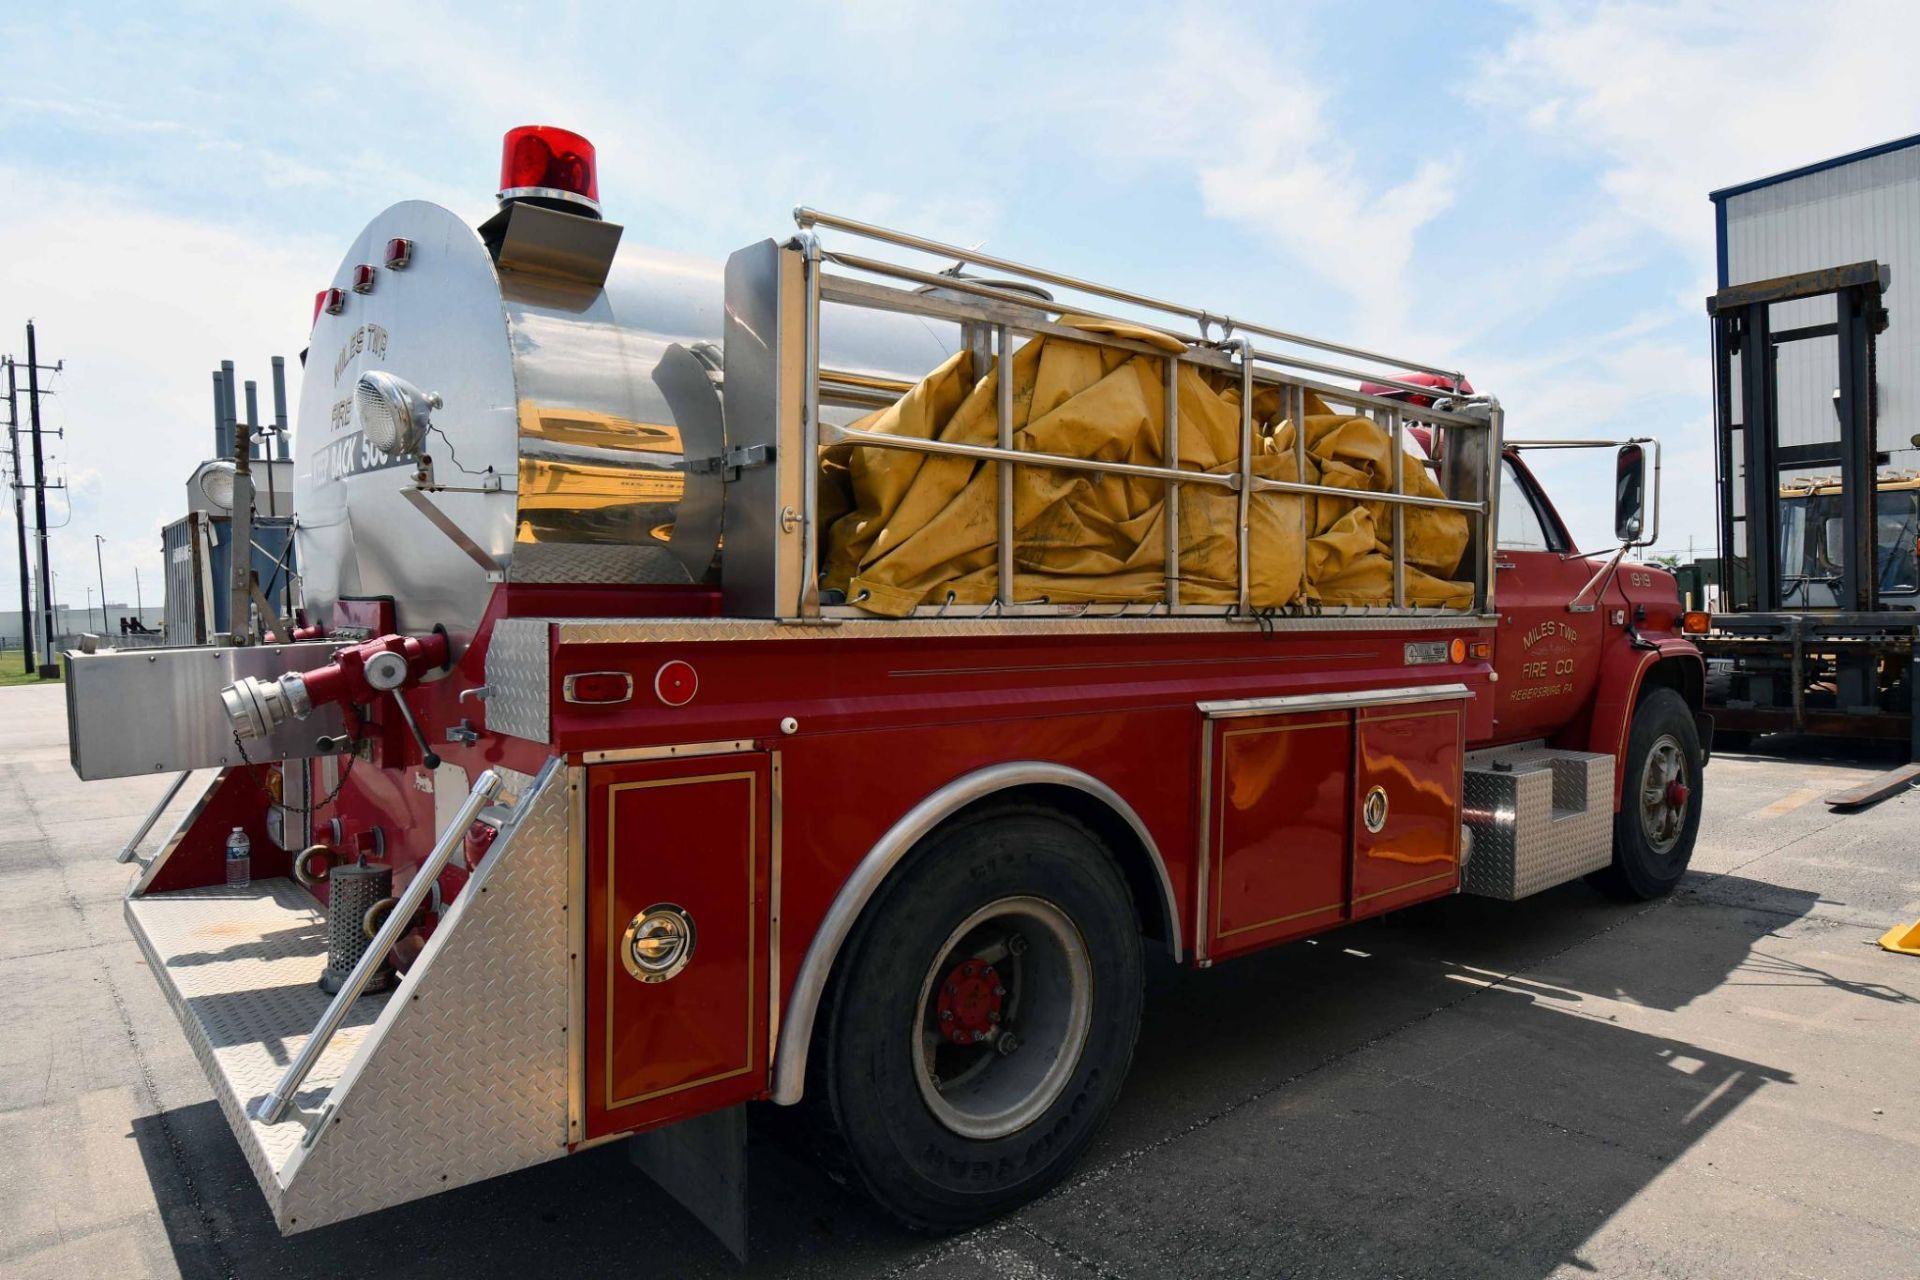 FIRE TRUCK, GMC MDL. 7000, 1989, gasoline, 34,000 GVWR, VIN # 1GDP7D1E4KV513118 (Yard use only) - Image 3 of 6